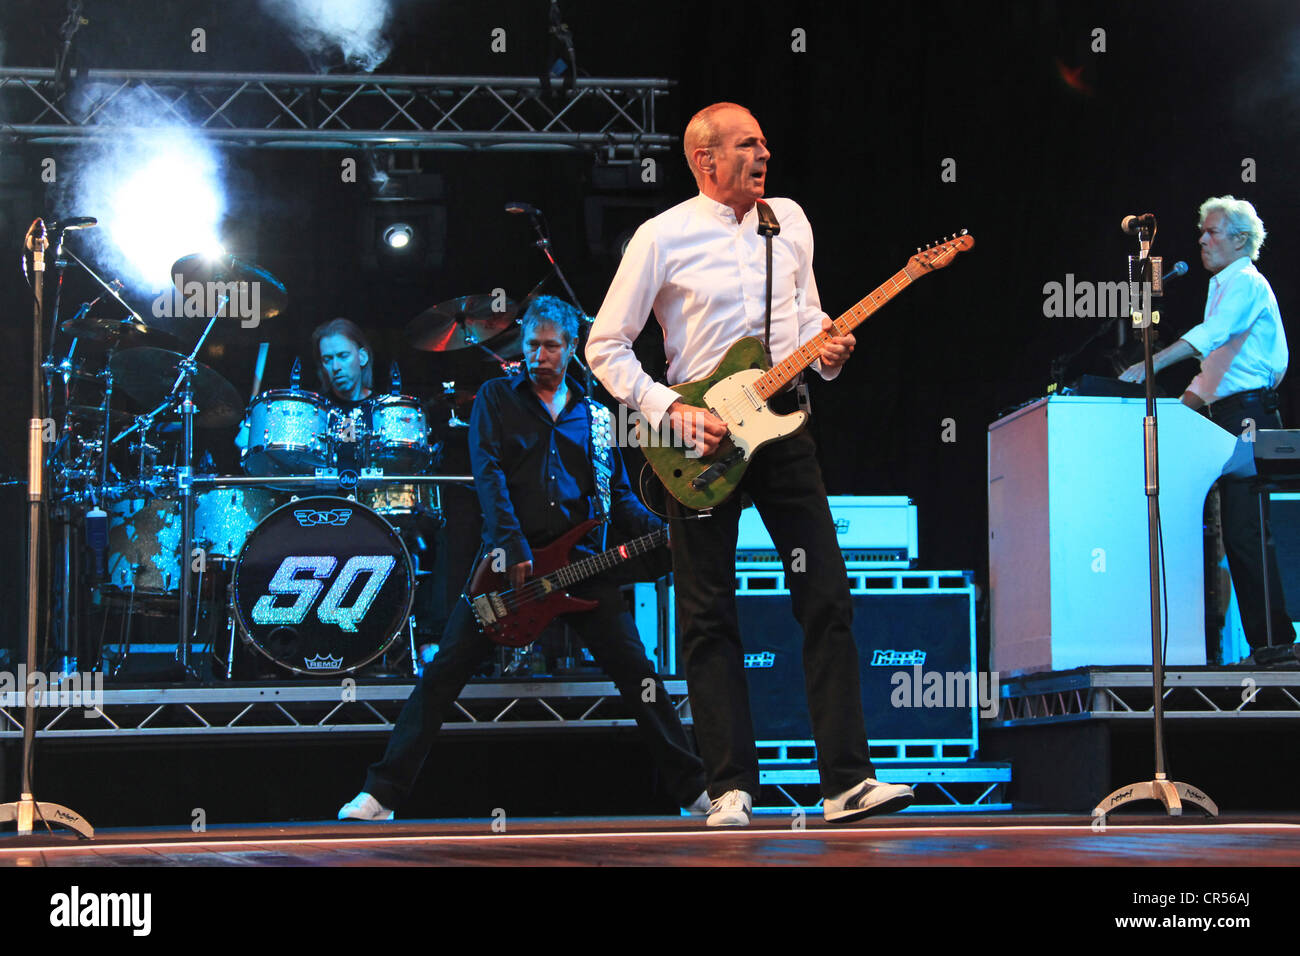 Francis Rossi, in the foreground, performing with his band Status Quo, Freilichtbuehne Junge Garde outdoor stage, Dresden Stock Photo